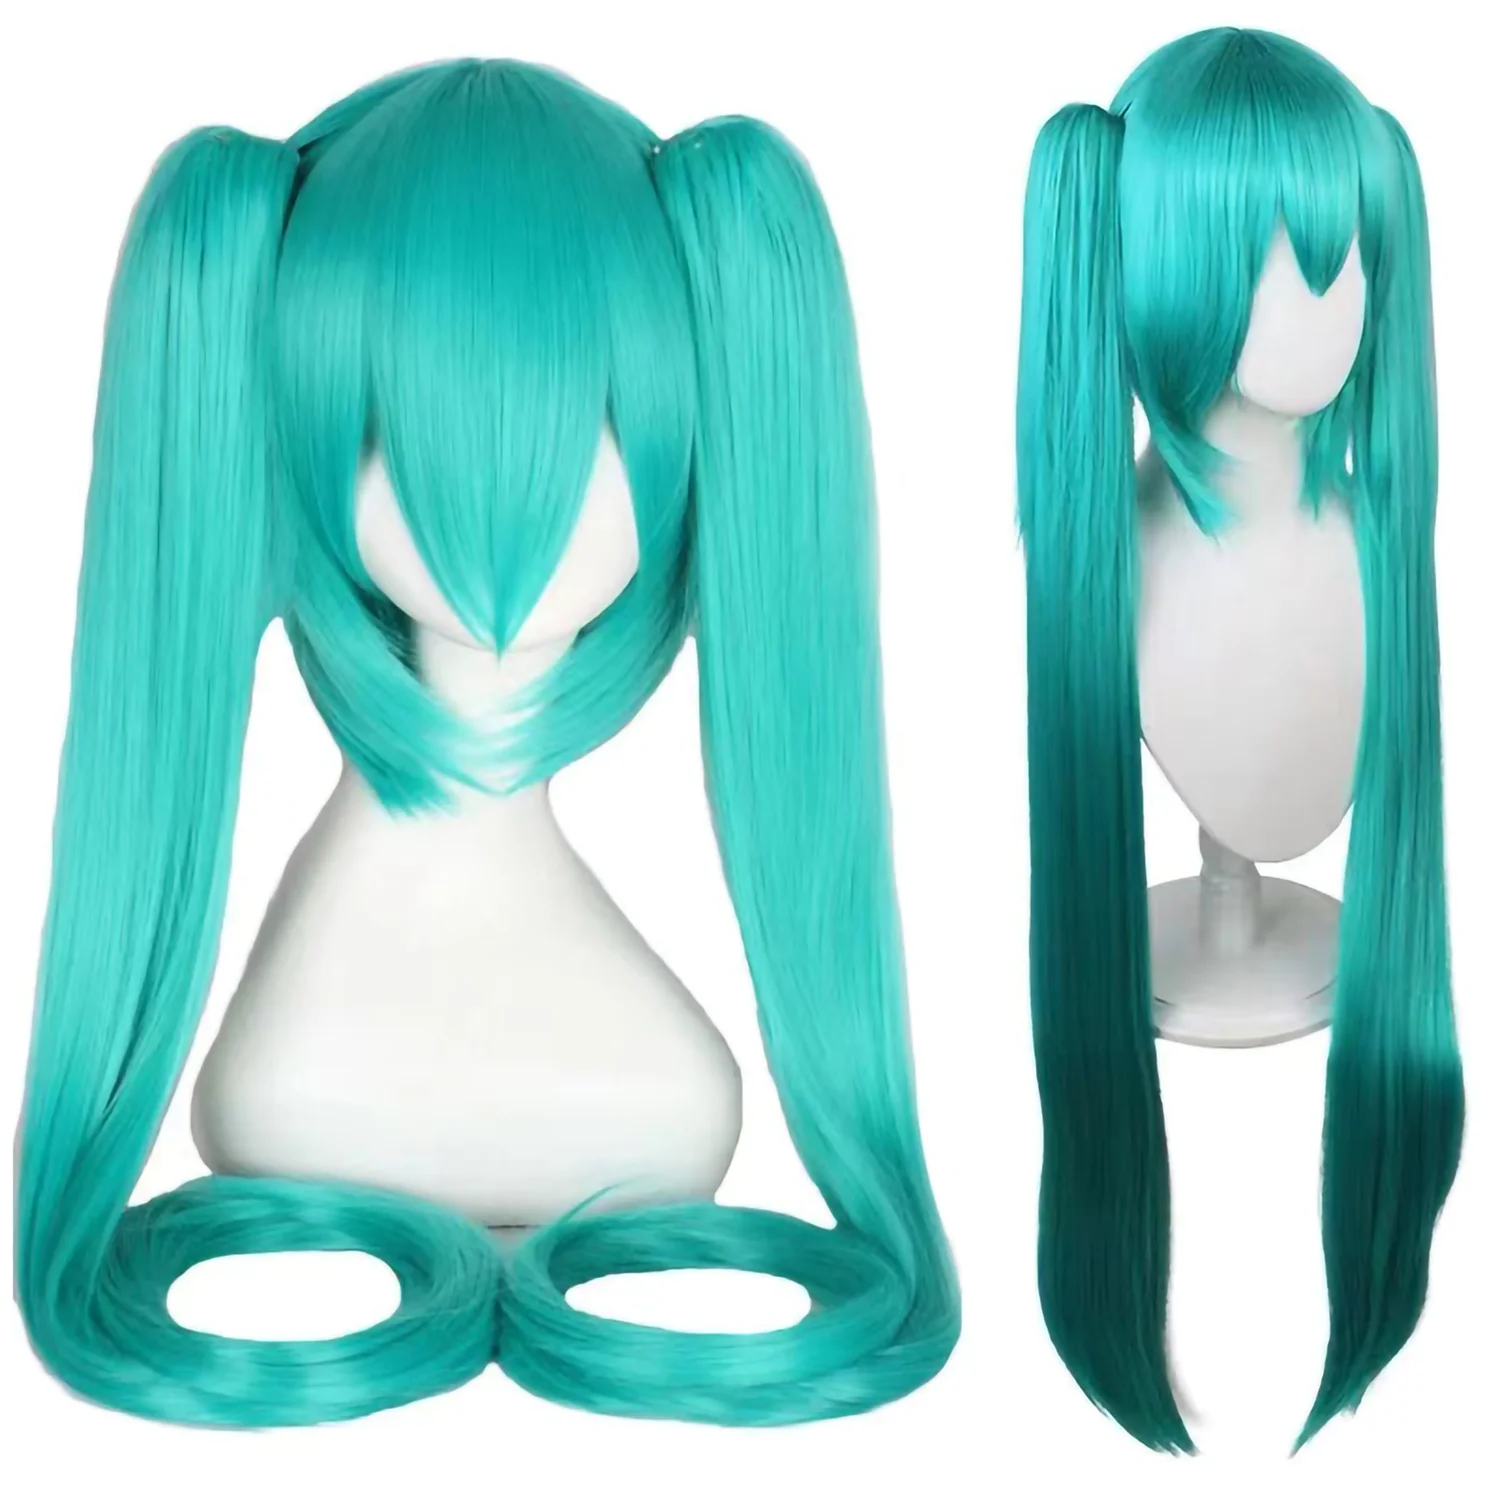 

120cm Hatsune Miku Cosplay Wig Anime Long Synthetic Hair Clips 2 Ponytails Lolita Wig for Halloween